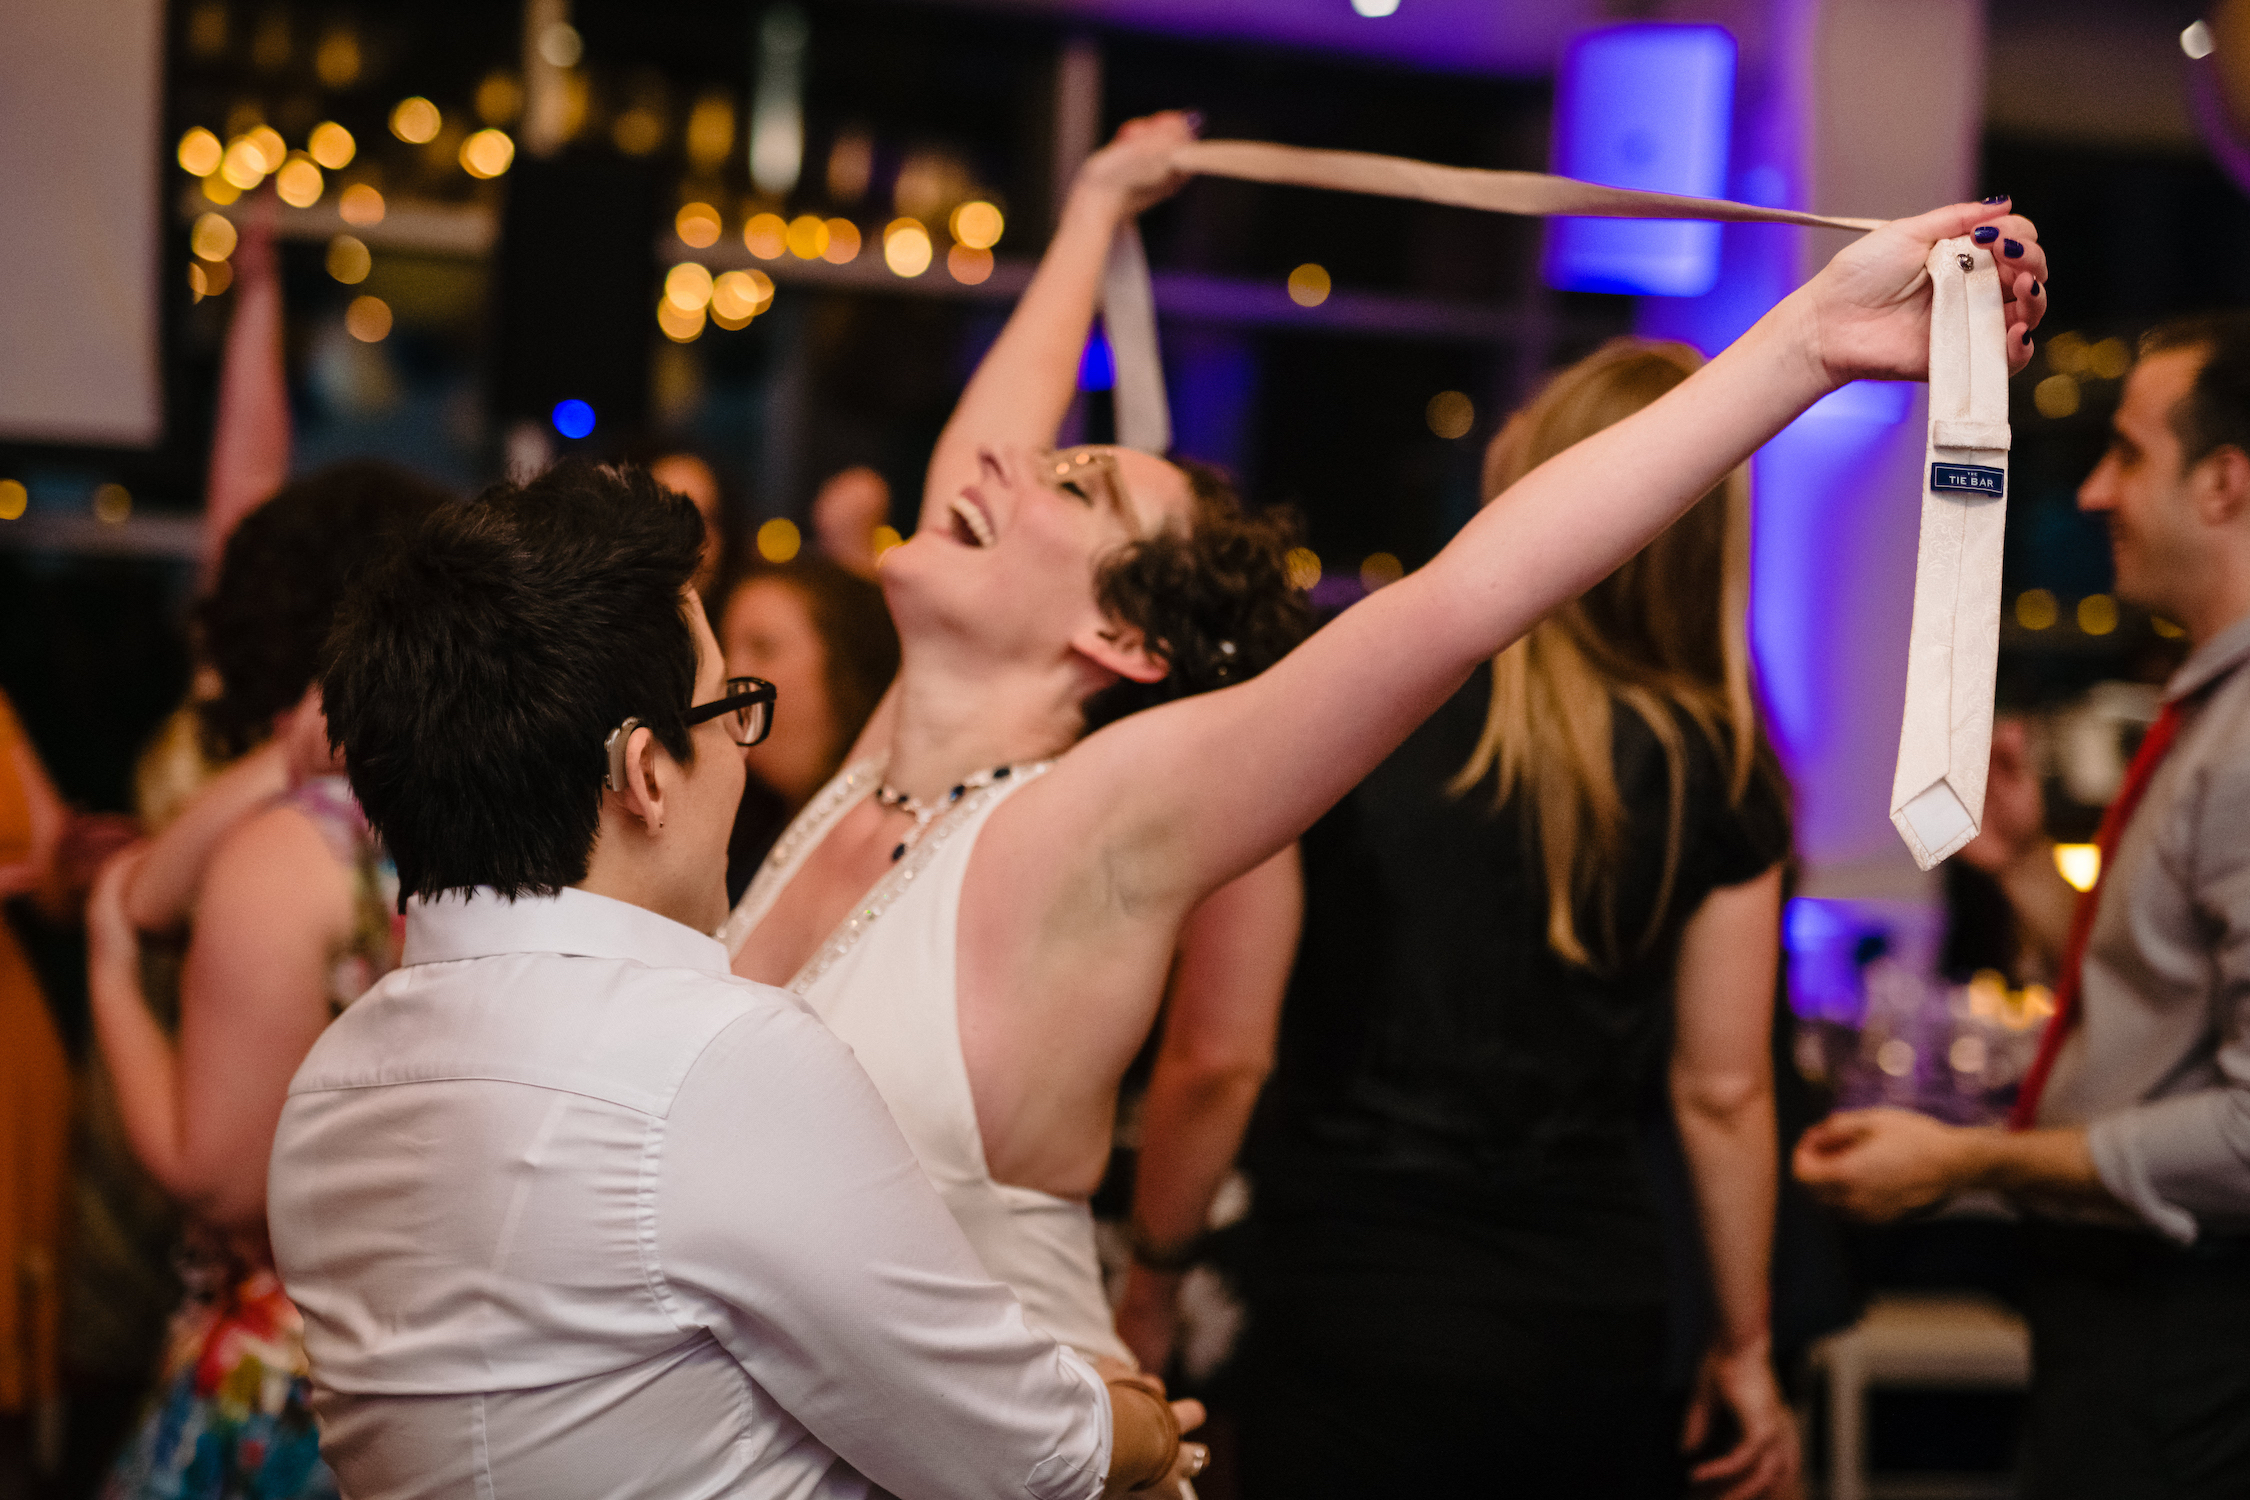 A woman dances with joy during her wedding reception in a photo by Devon Rowland